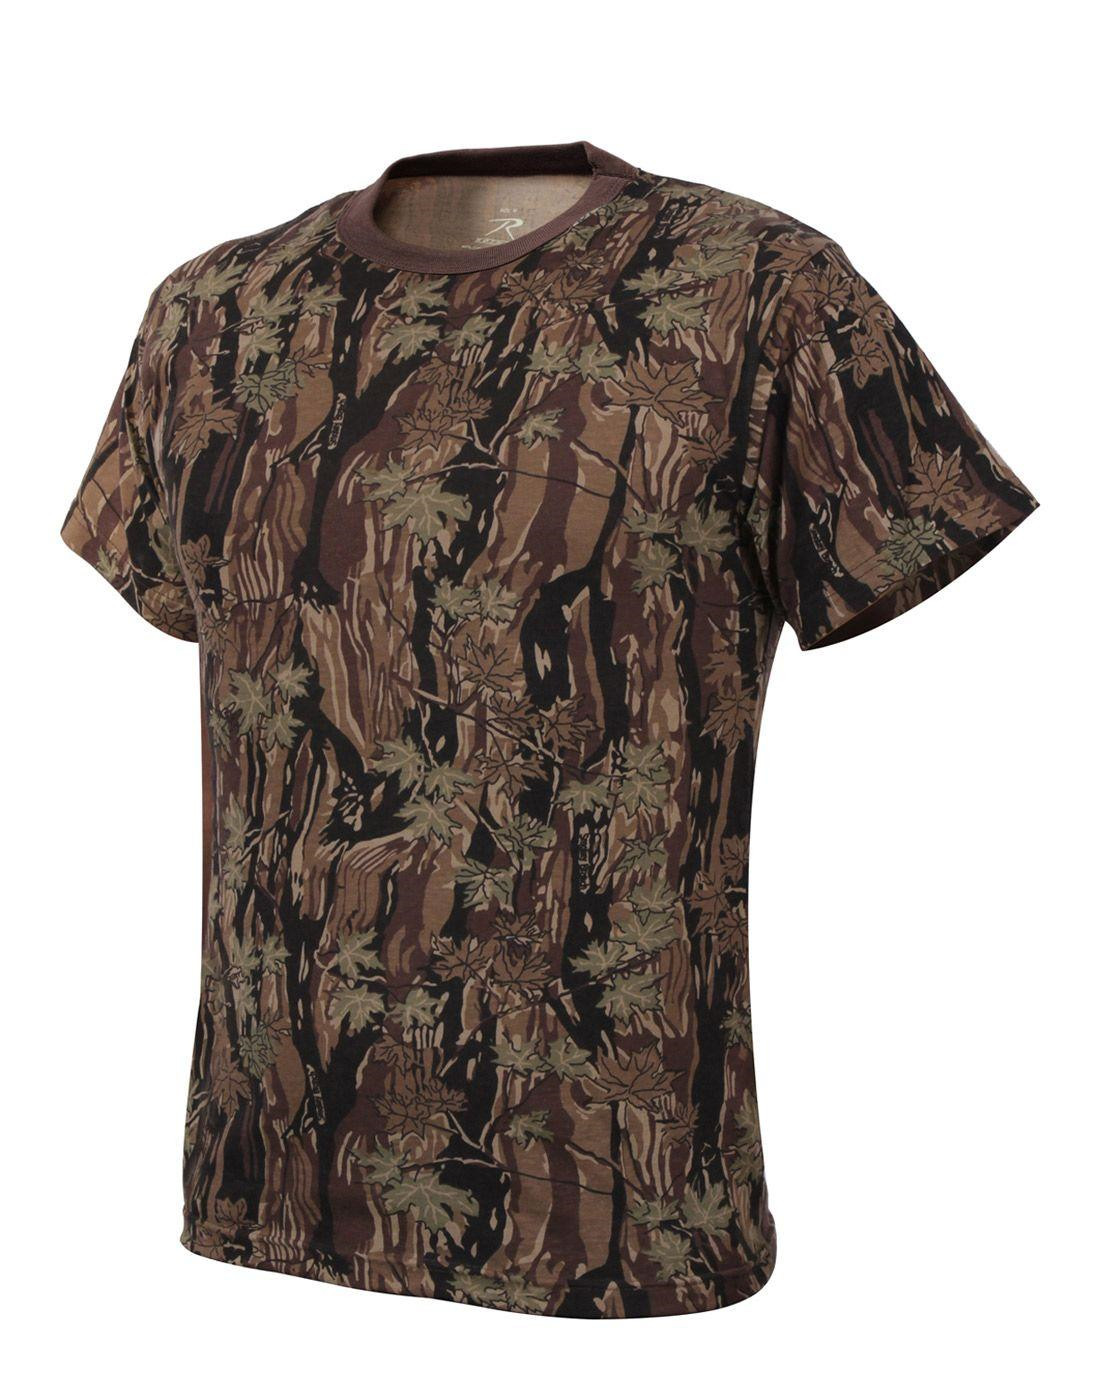 Rothco T-shirt - Mange Camouflager (Smokey Branch, S)